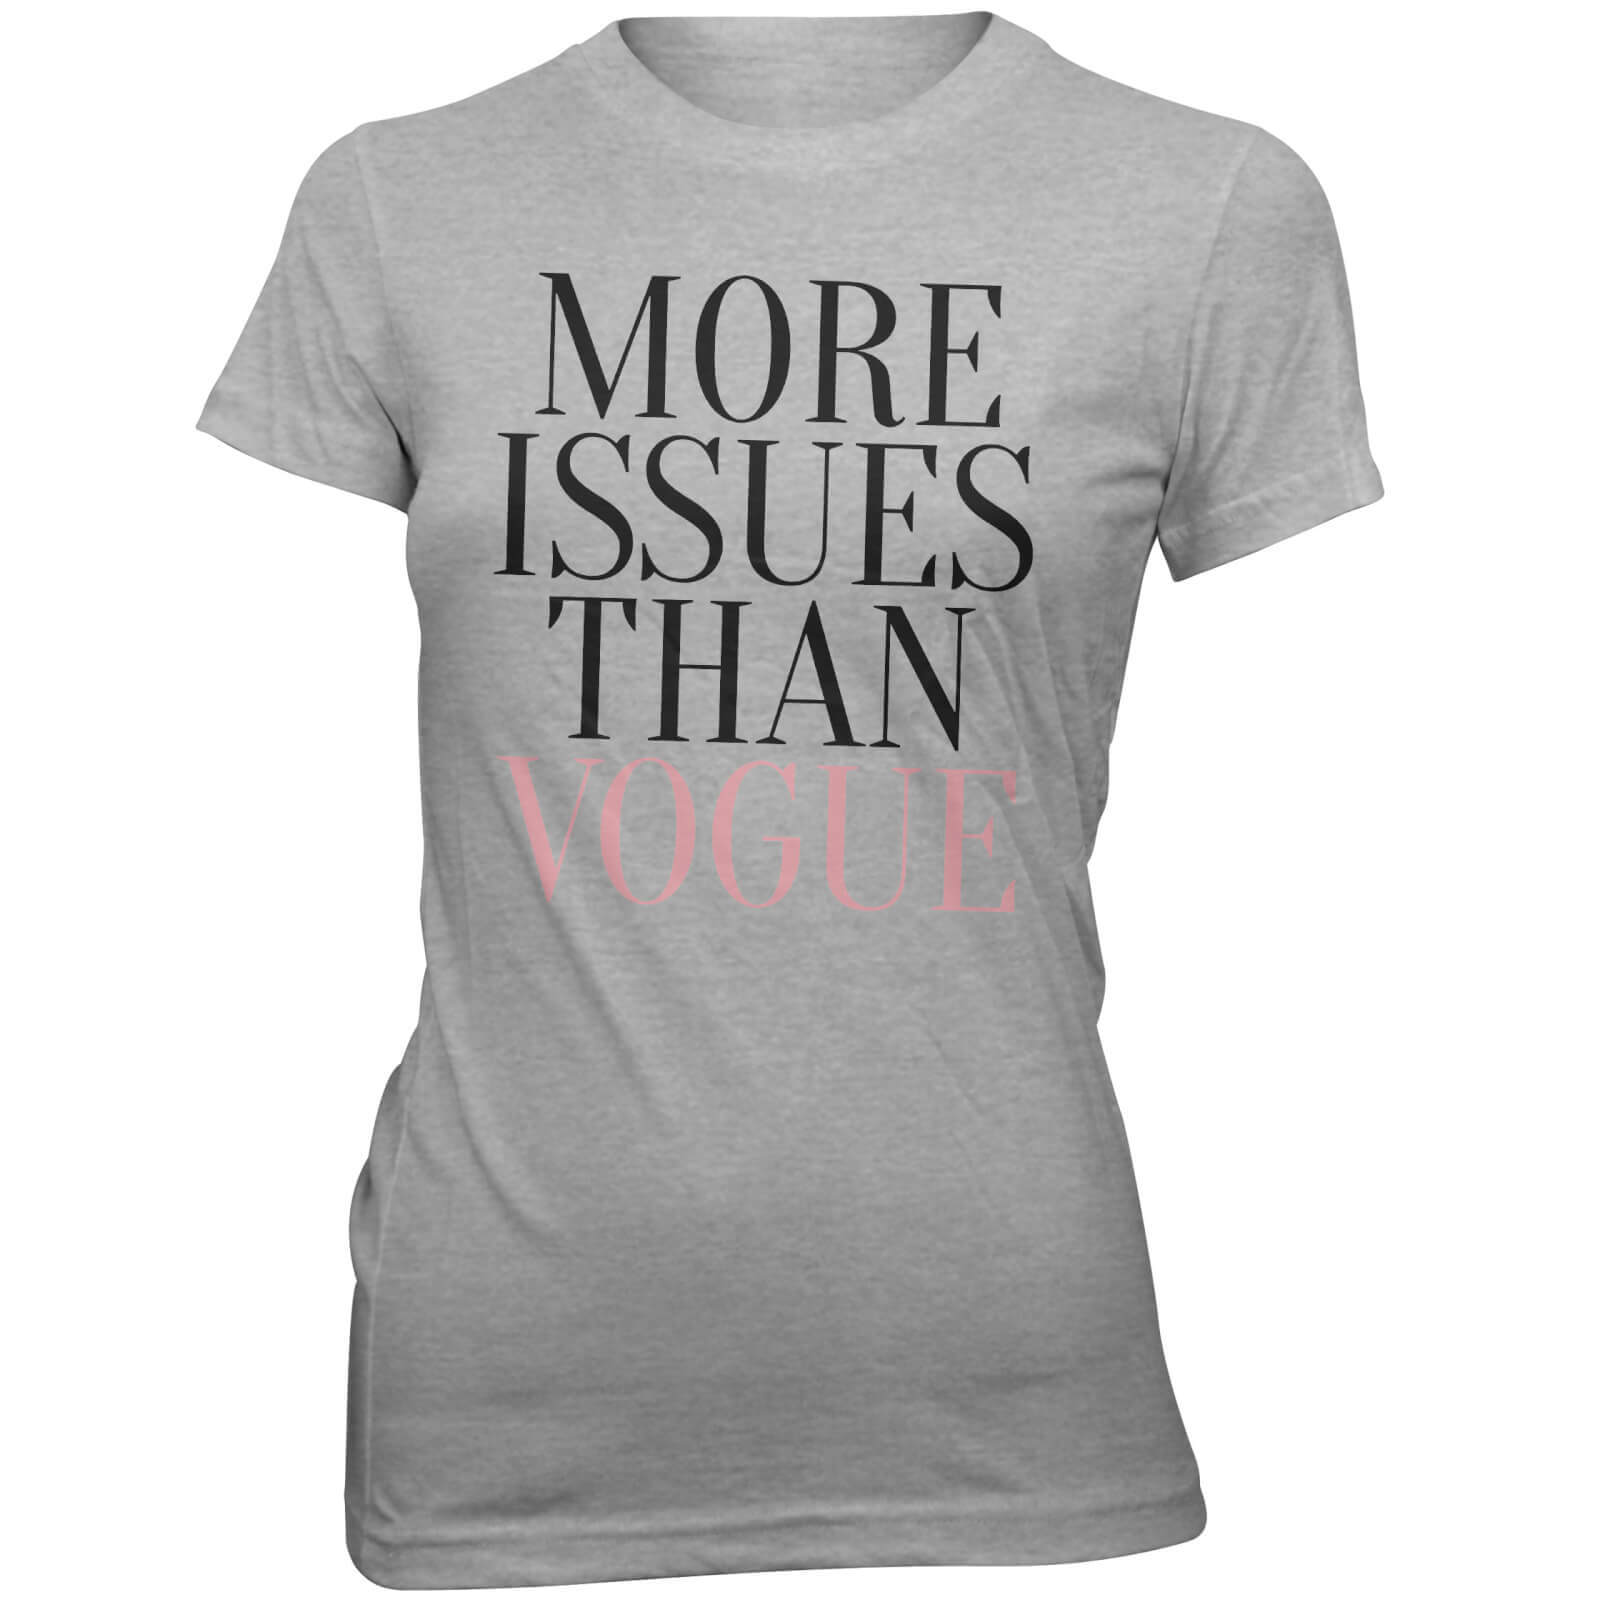 More Issues Than Vogue Women's Slogan T-Shirt - S - Grey